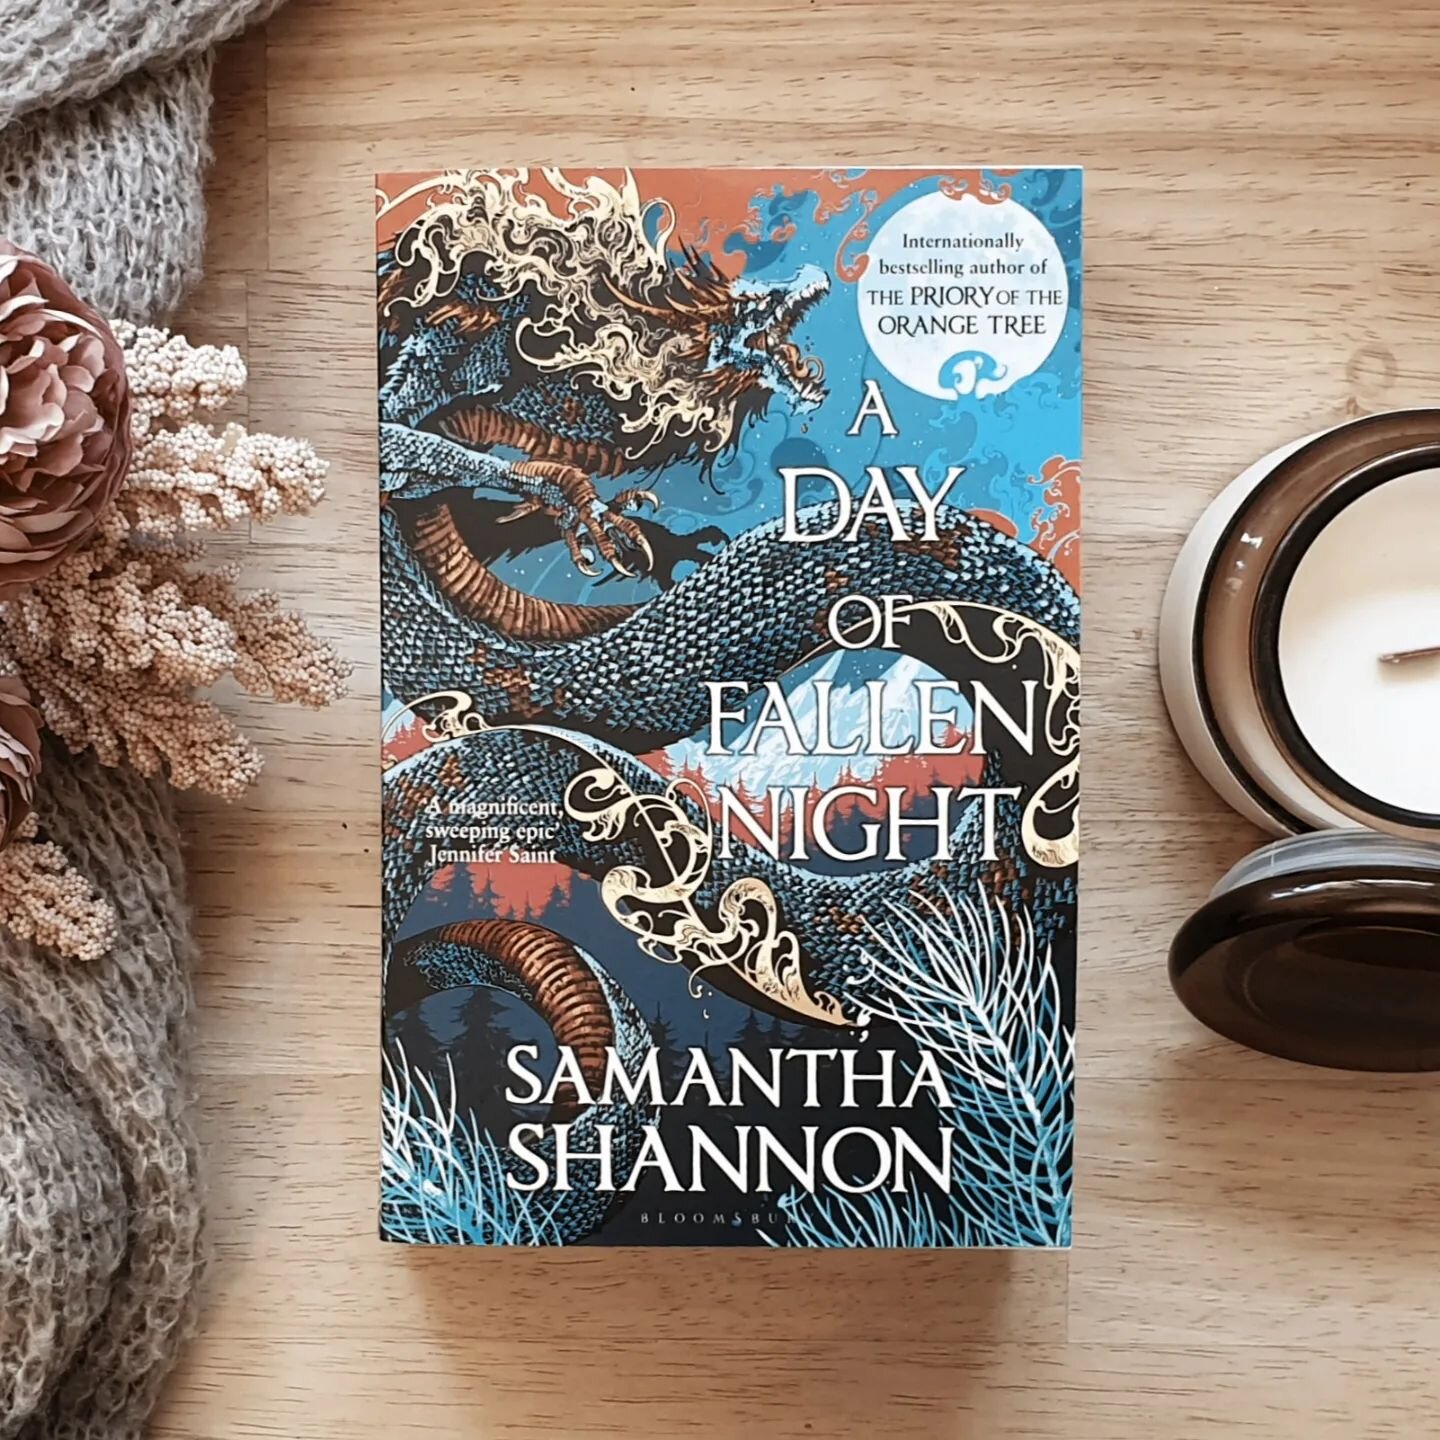 No review; just tears and a whole lot of whimpering. Five stars 

#adayoffallennight #samanthashannon #fantasy #epicfantasy #bookstagram #bookish #bibliophile #bookishlife #bookishlove #books #beautifulbooks #coverlove #amreading